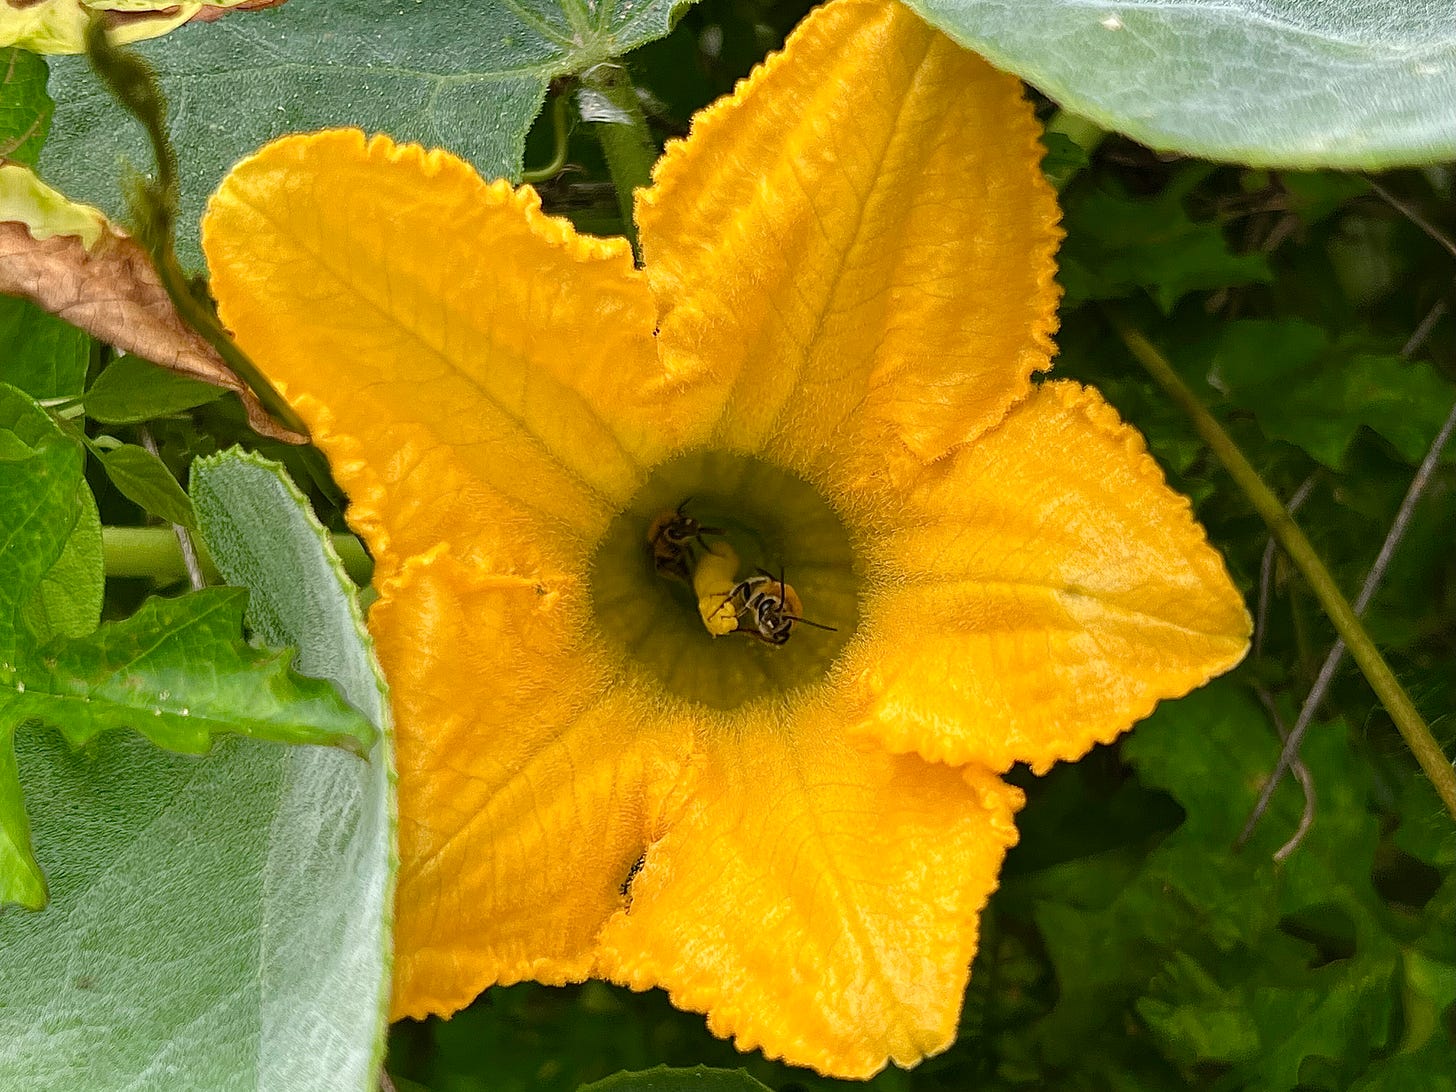 Buffalo gourd blossom with honeybees